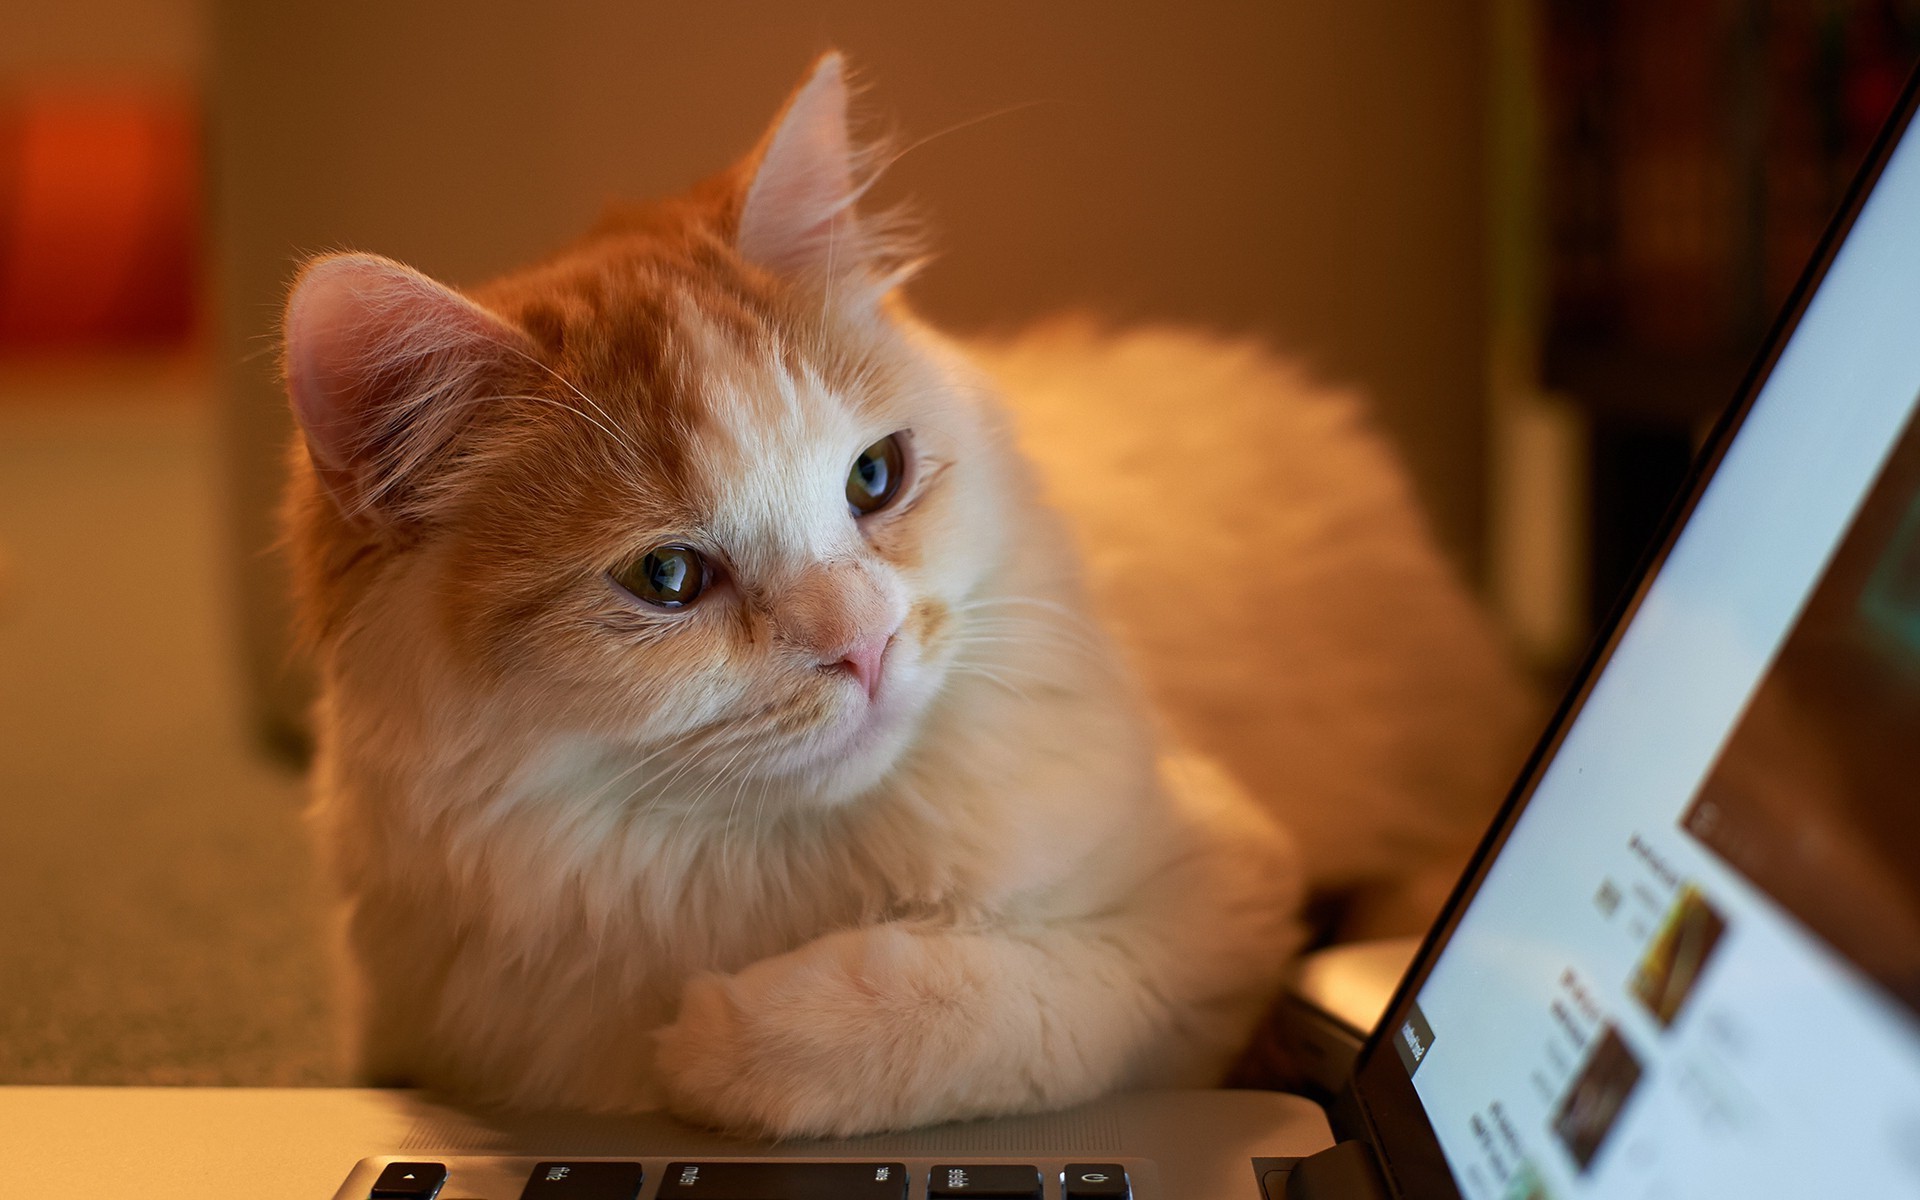  cat  laptop  Wallpapers  HD  Desktop  and Mobile Backgrounds 